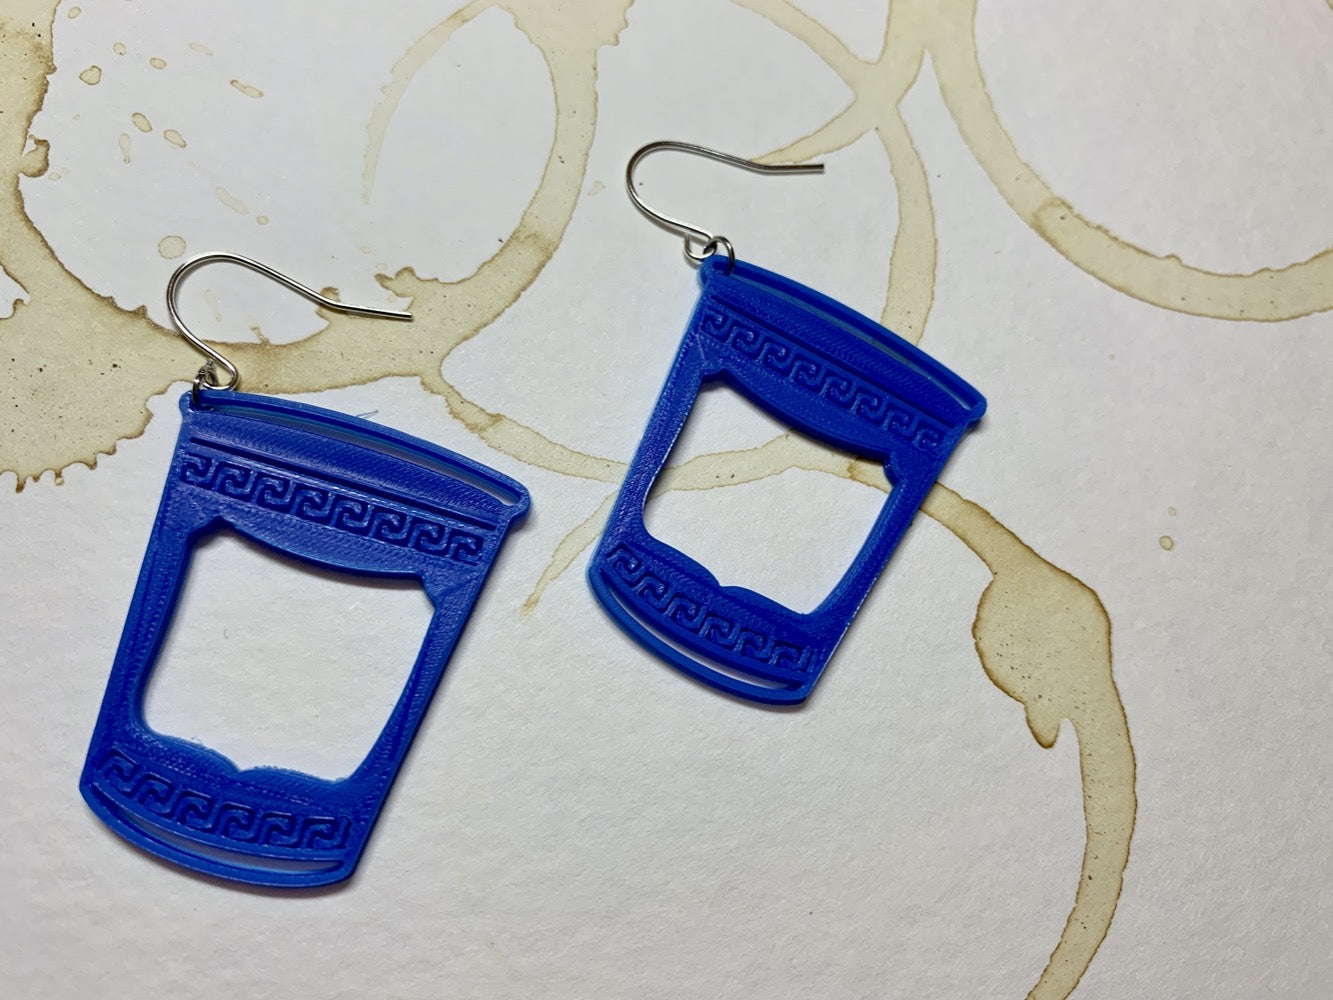 Two earrings that are made of a plant based plastic. They are in the shape of to-go coffee cups: The iconic ones from Greek diners or NYC bodegas with swirling borders and a big panel in the center. These earrings are resting on a paper that is stained with coffee rings overlapping one another. 